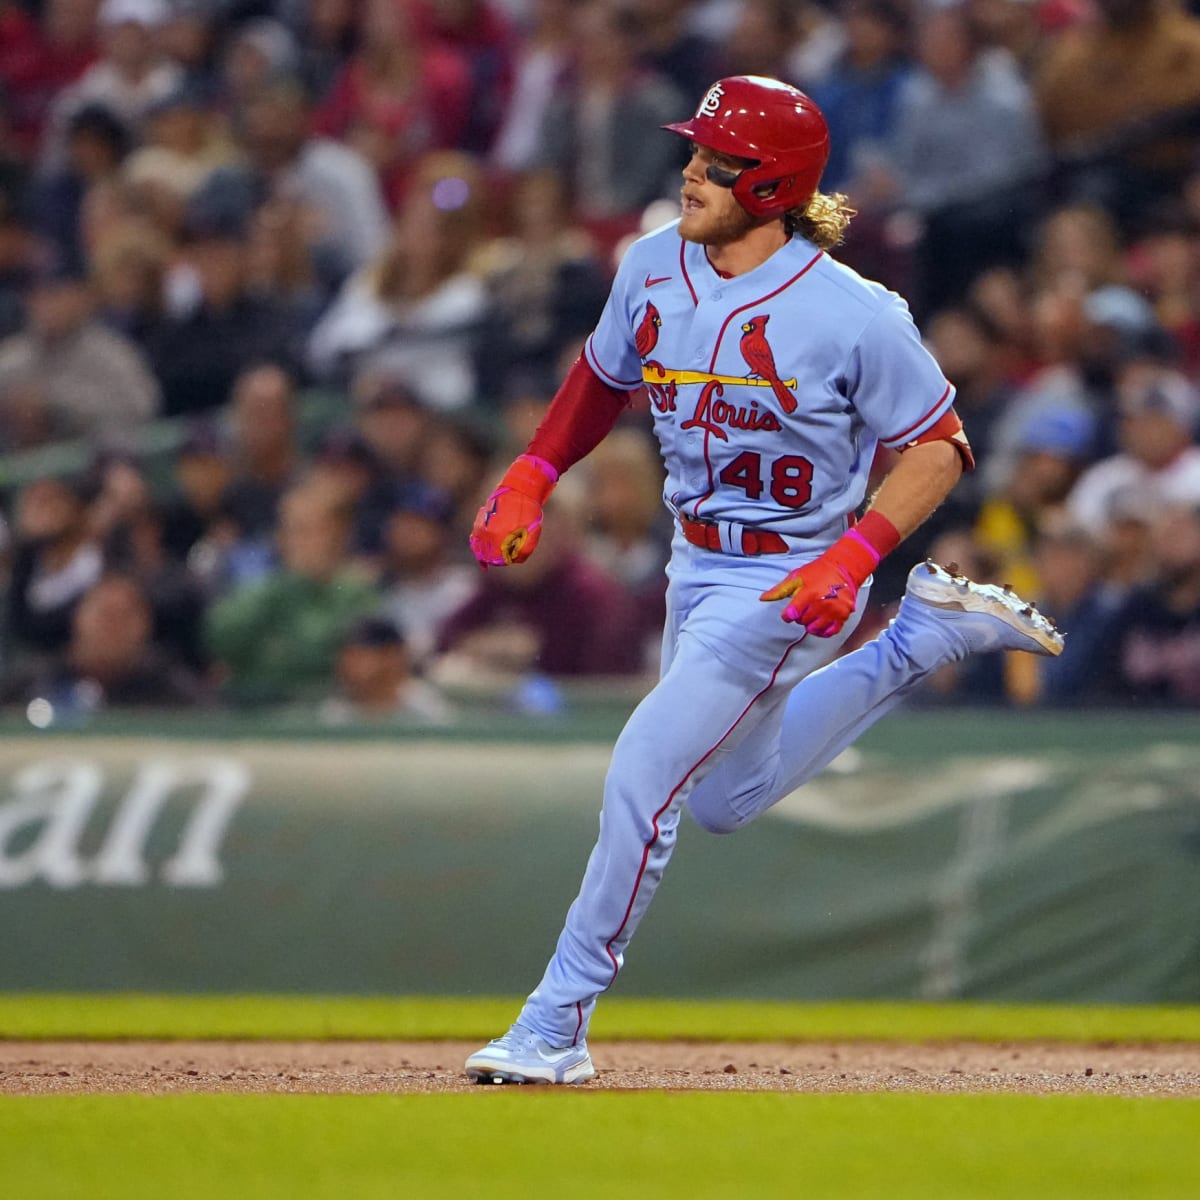 Harrison Bader injury: Yankees OF nears rehab assignment